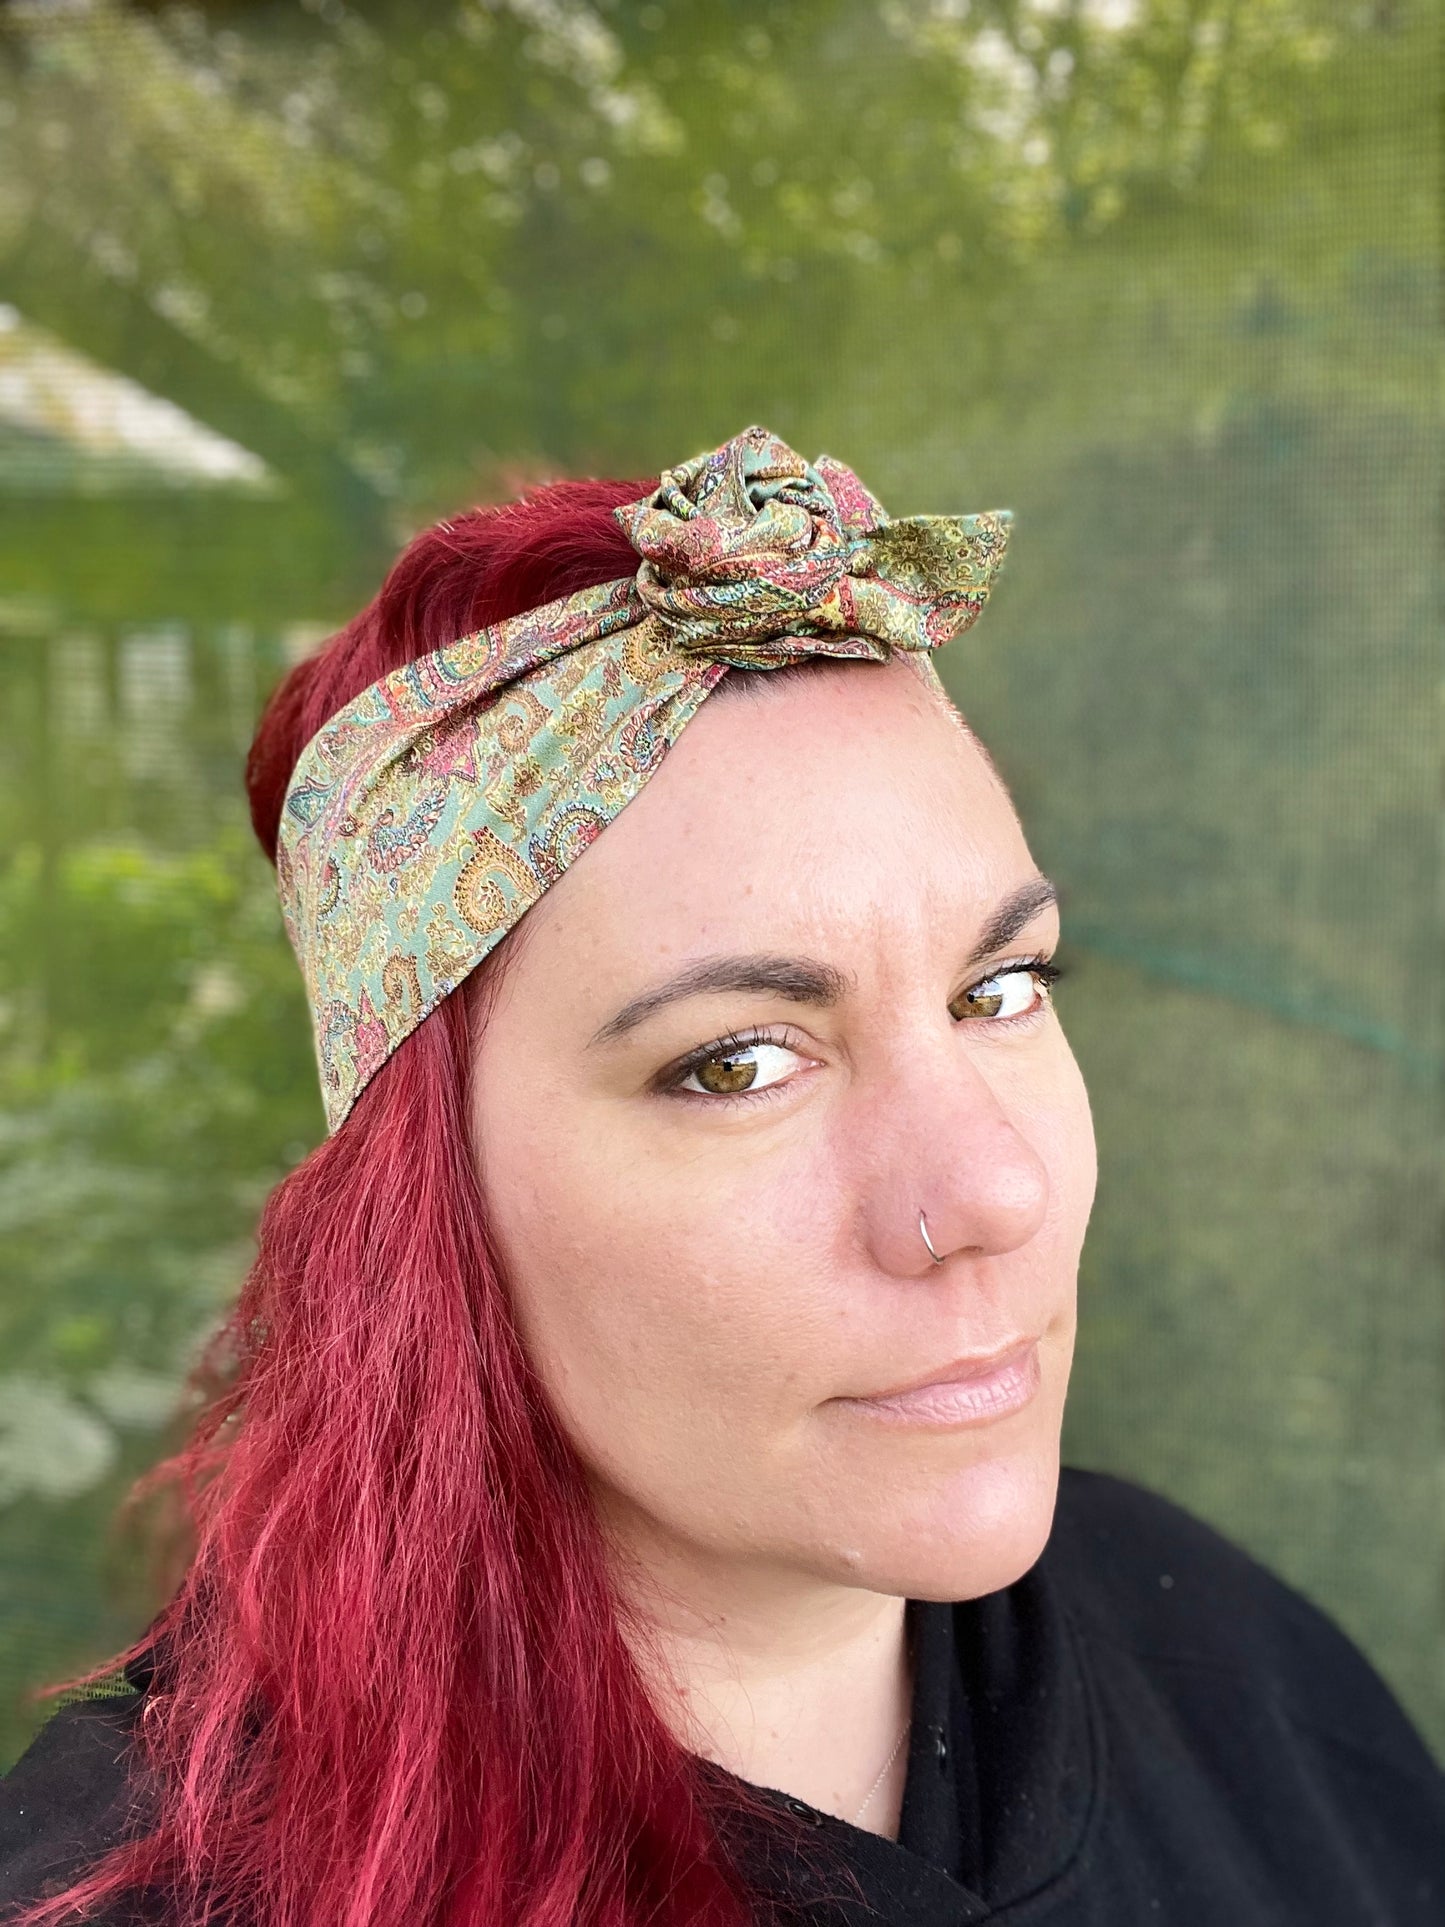 Sage Paisley Boho Wire Headband - Bae Bands Australia Twist Bow Wire Headband allows for your headband to stay in place all day with no headaches,